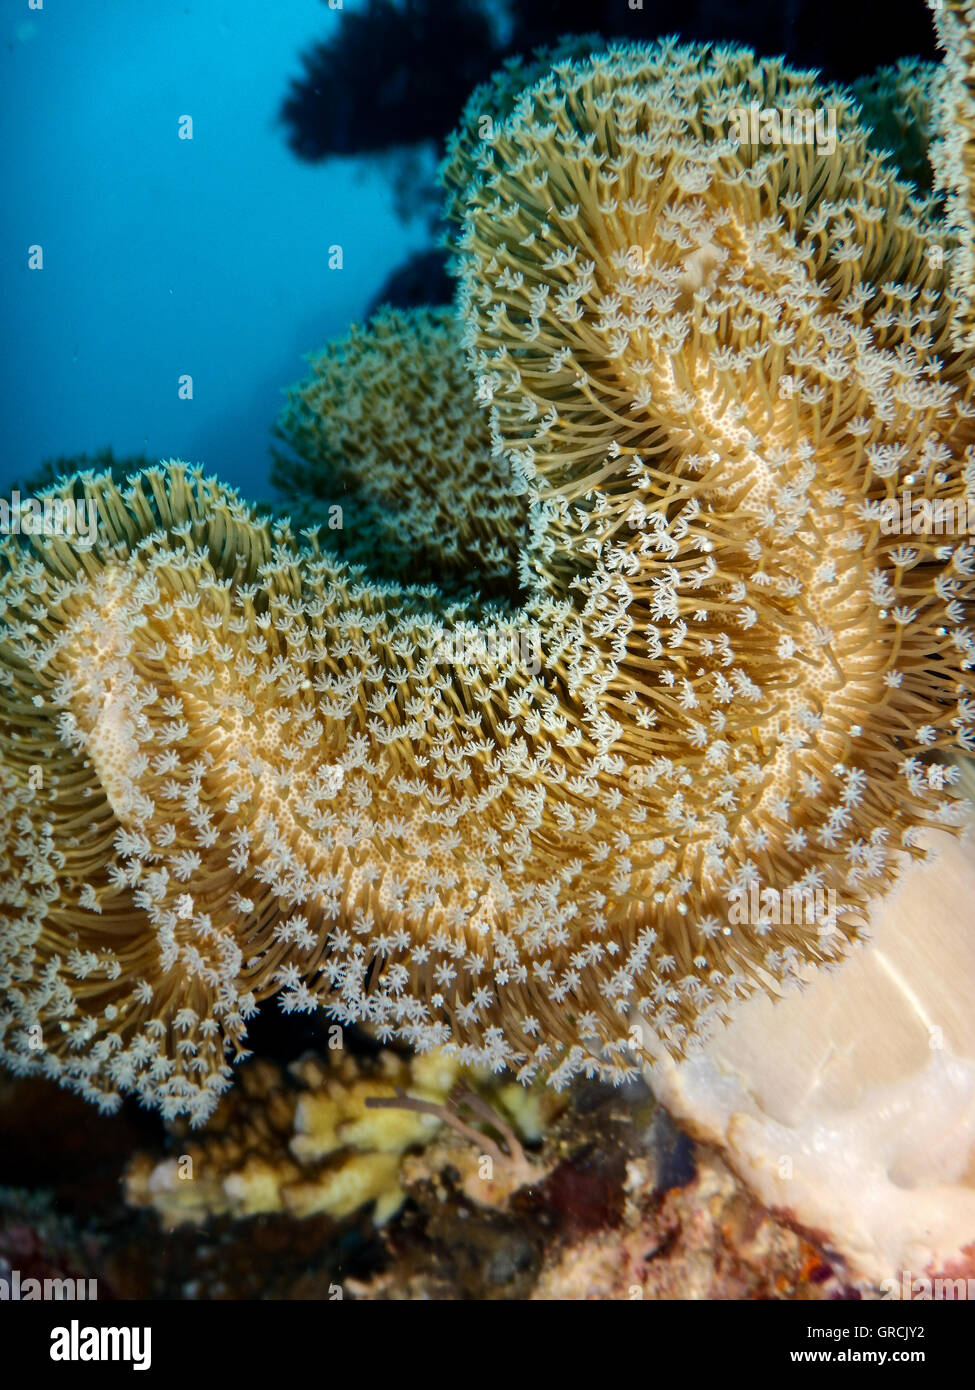 Colony Of The Polyps Of A Toadstool Leather Coral Sarcophyton Sp. In The Background Blue Surface Of Water. Selayar, South Sulawesi, Indonesia Stock Photo